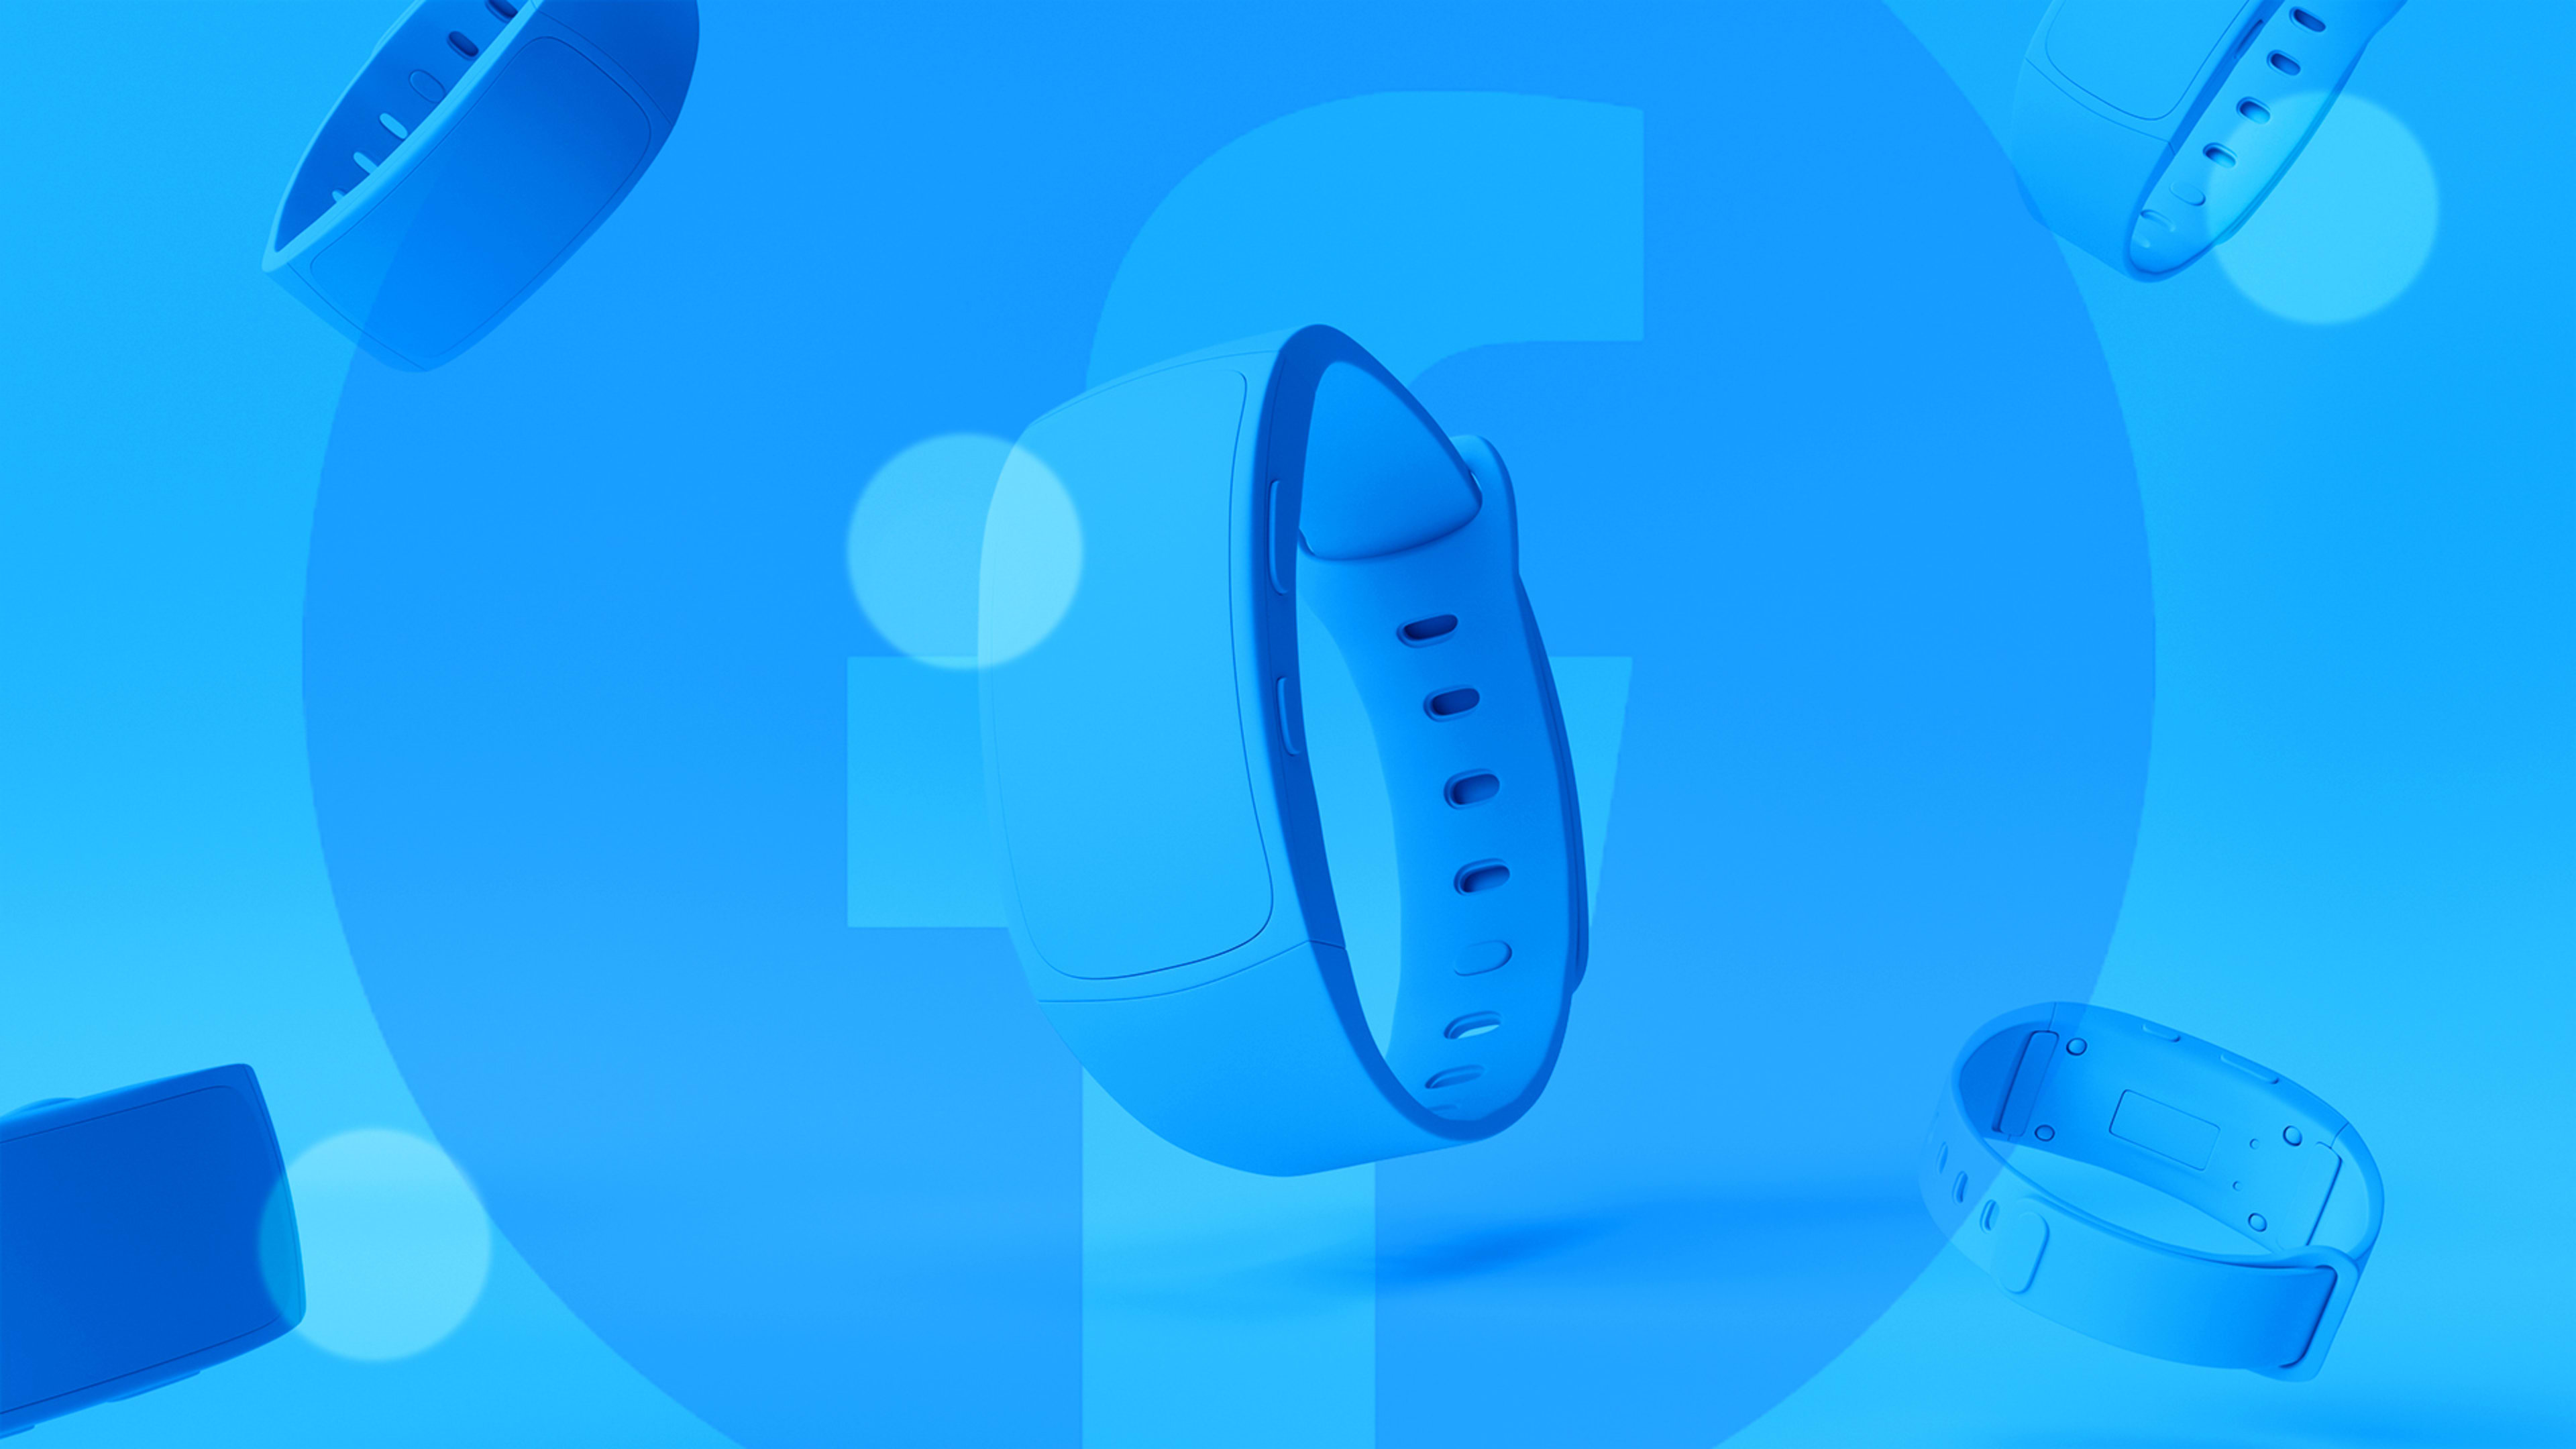 With a wearable reportedly in the works, Facebook continues a quiet push into health